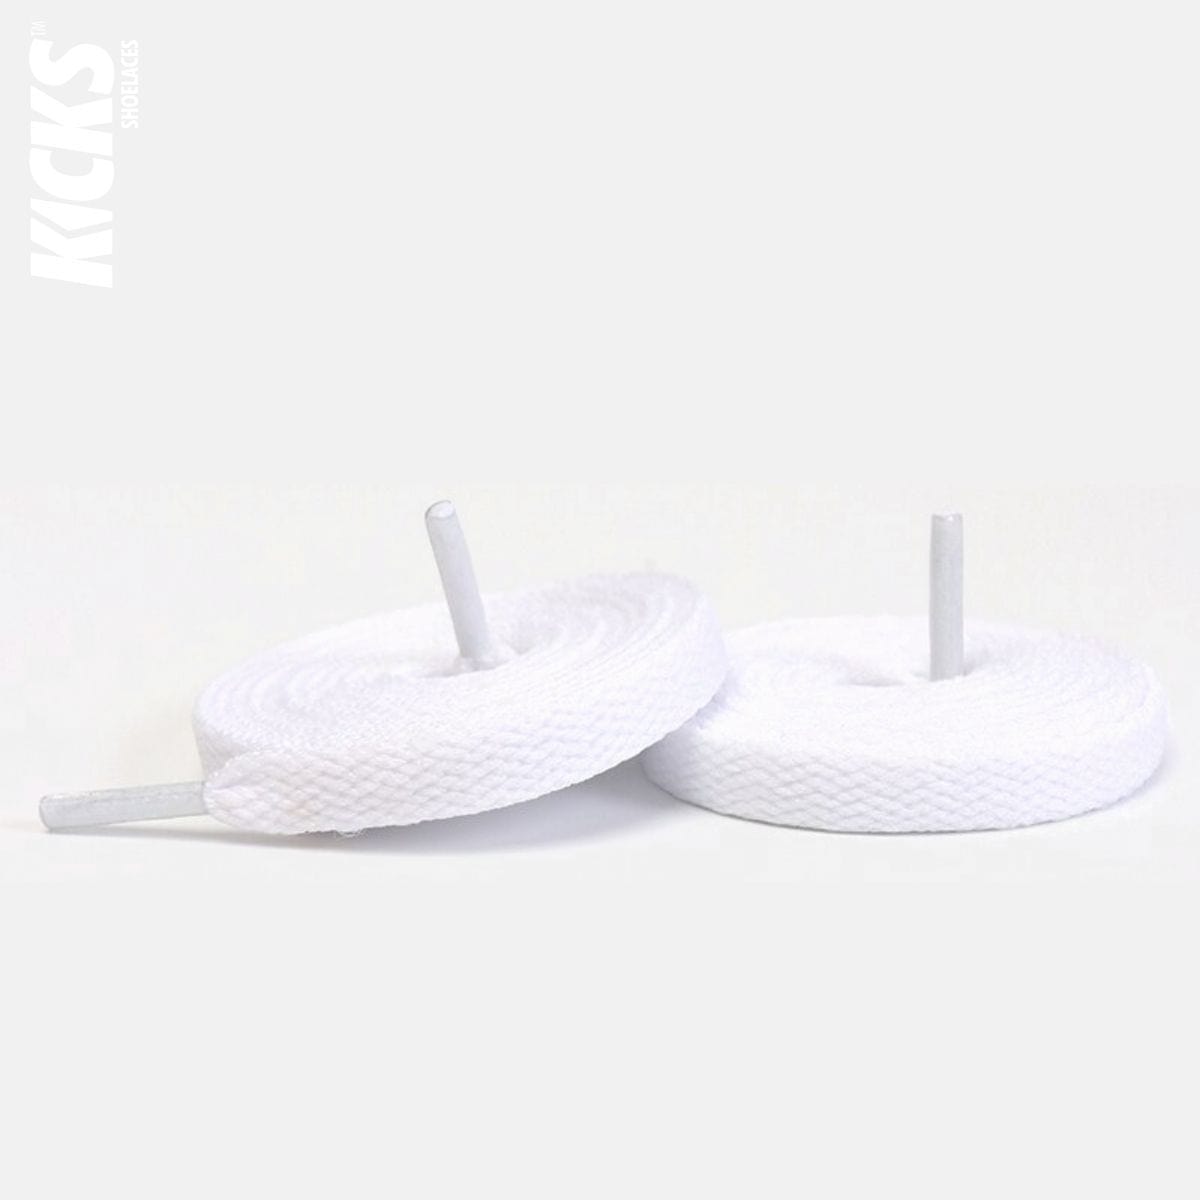 Nike Air Force 1 High Replacement Shoelaces